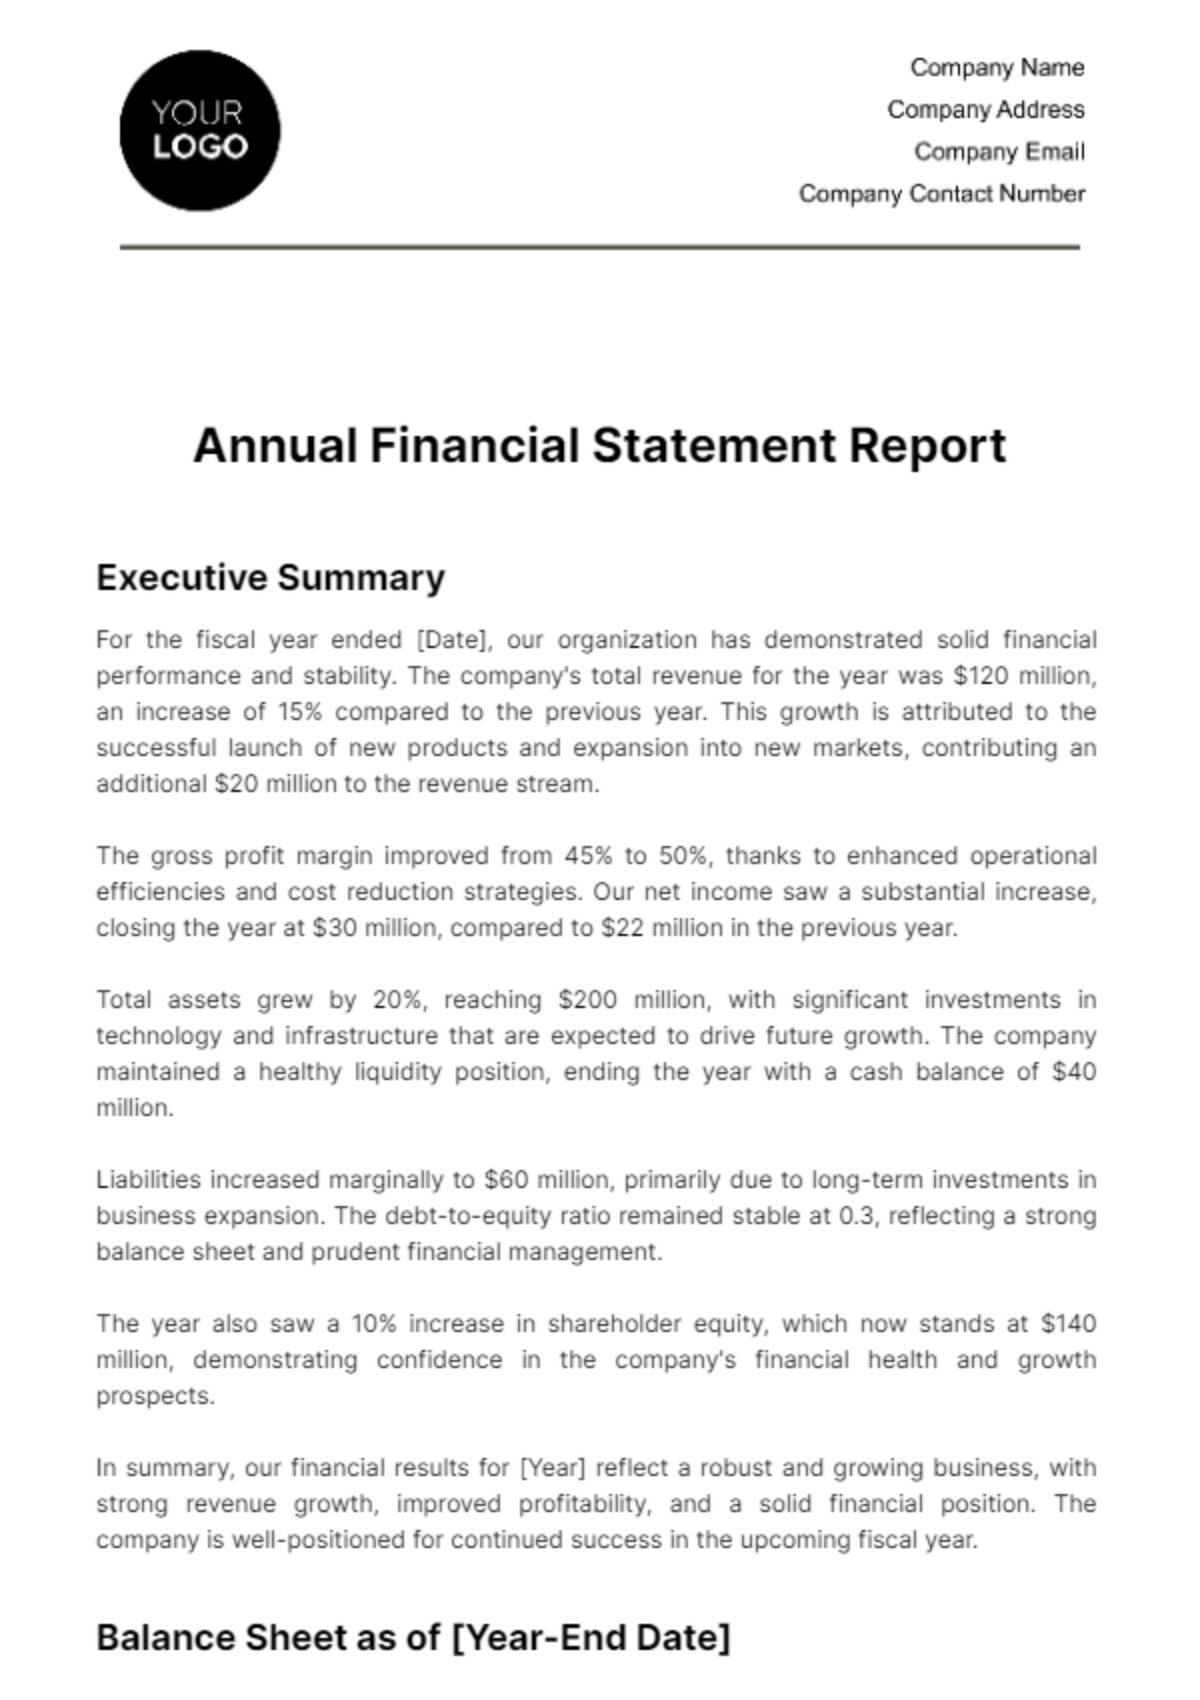 Annual Financial Statement Report Template